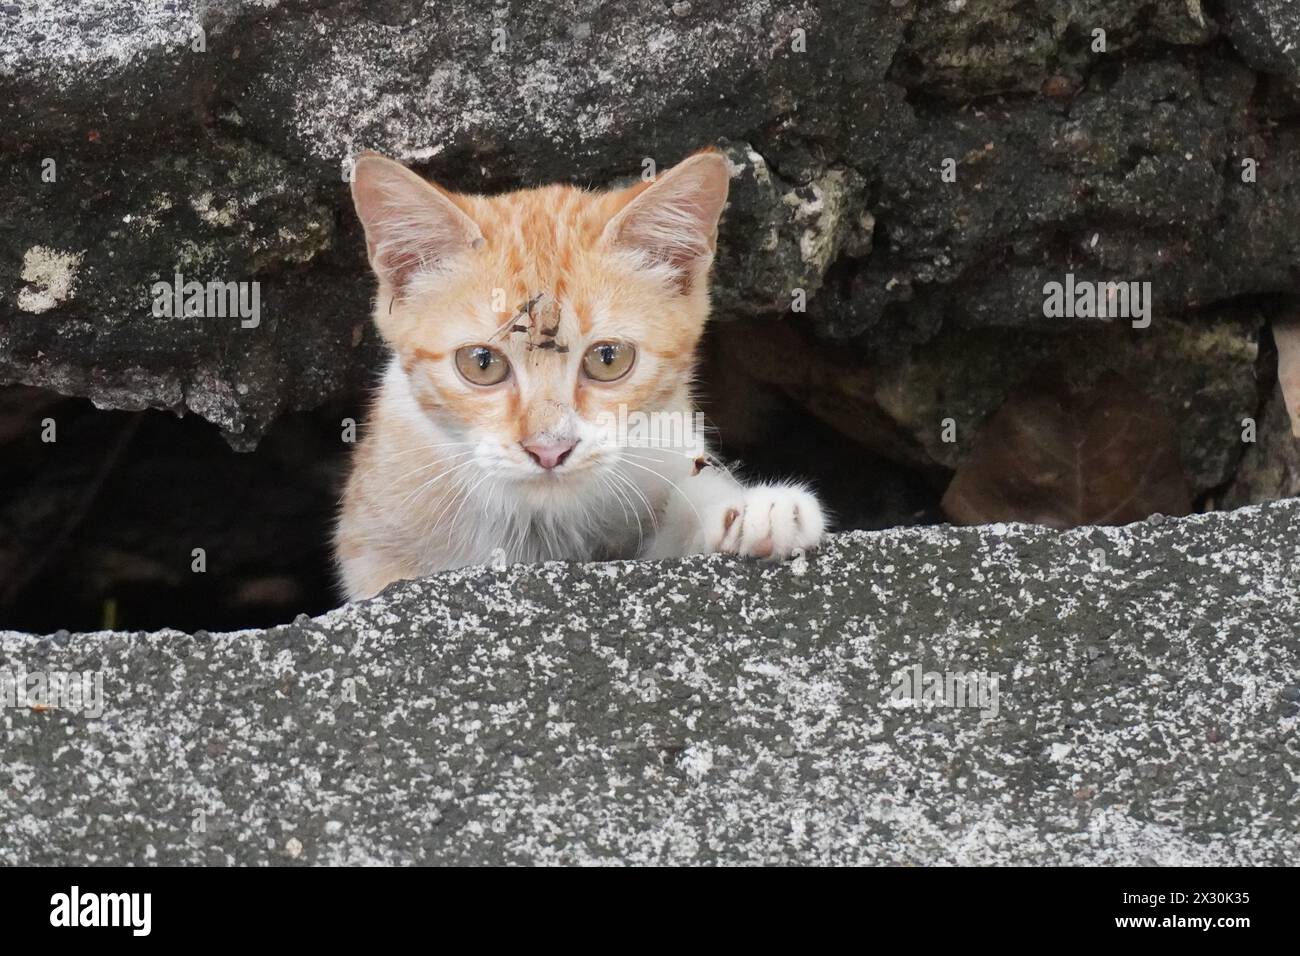 A small orange white cat peeking out behind the gutter and looking at the camera Stock Photo